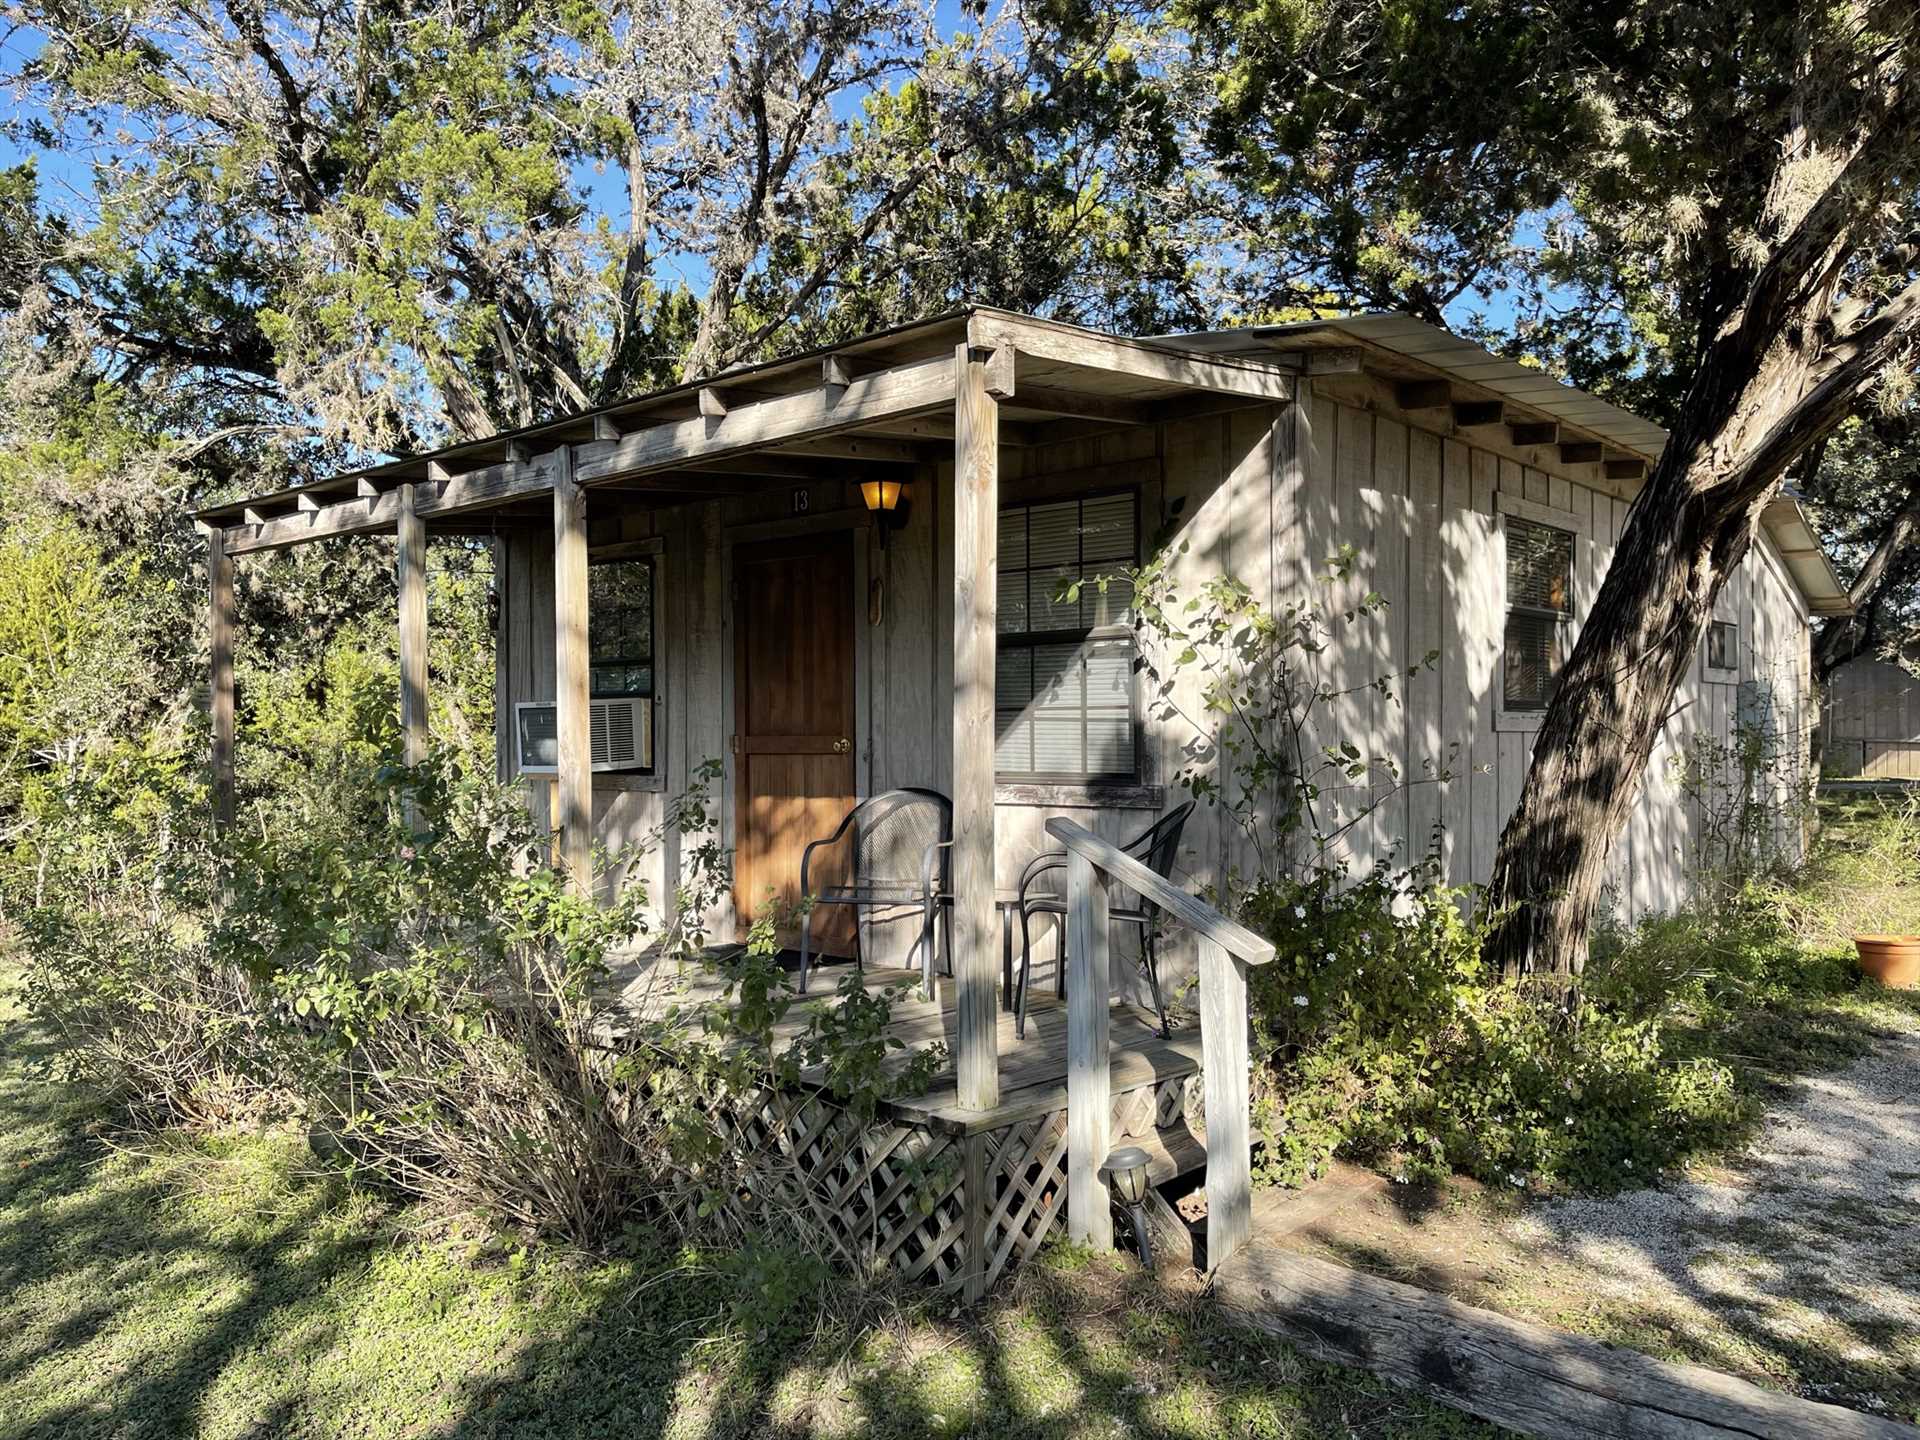                                                 Nestled in the trees, the Juniper Cabin is your private getaway spot in the gorgeous Hill Country!